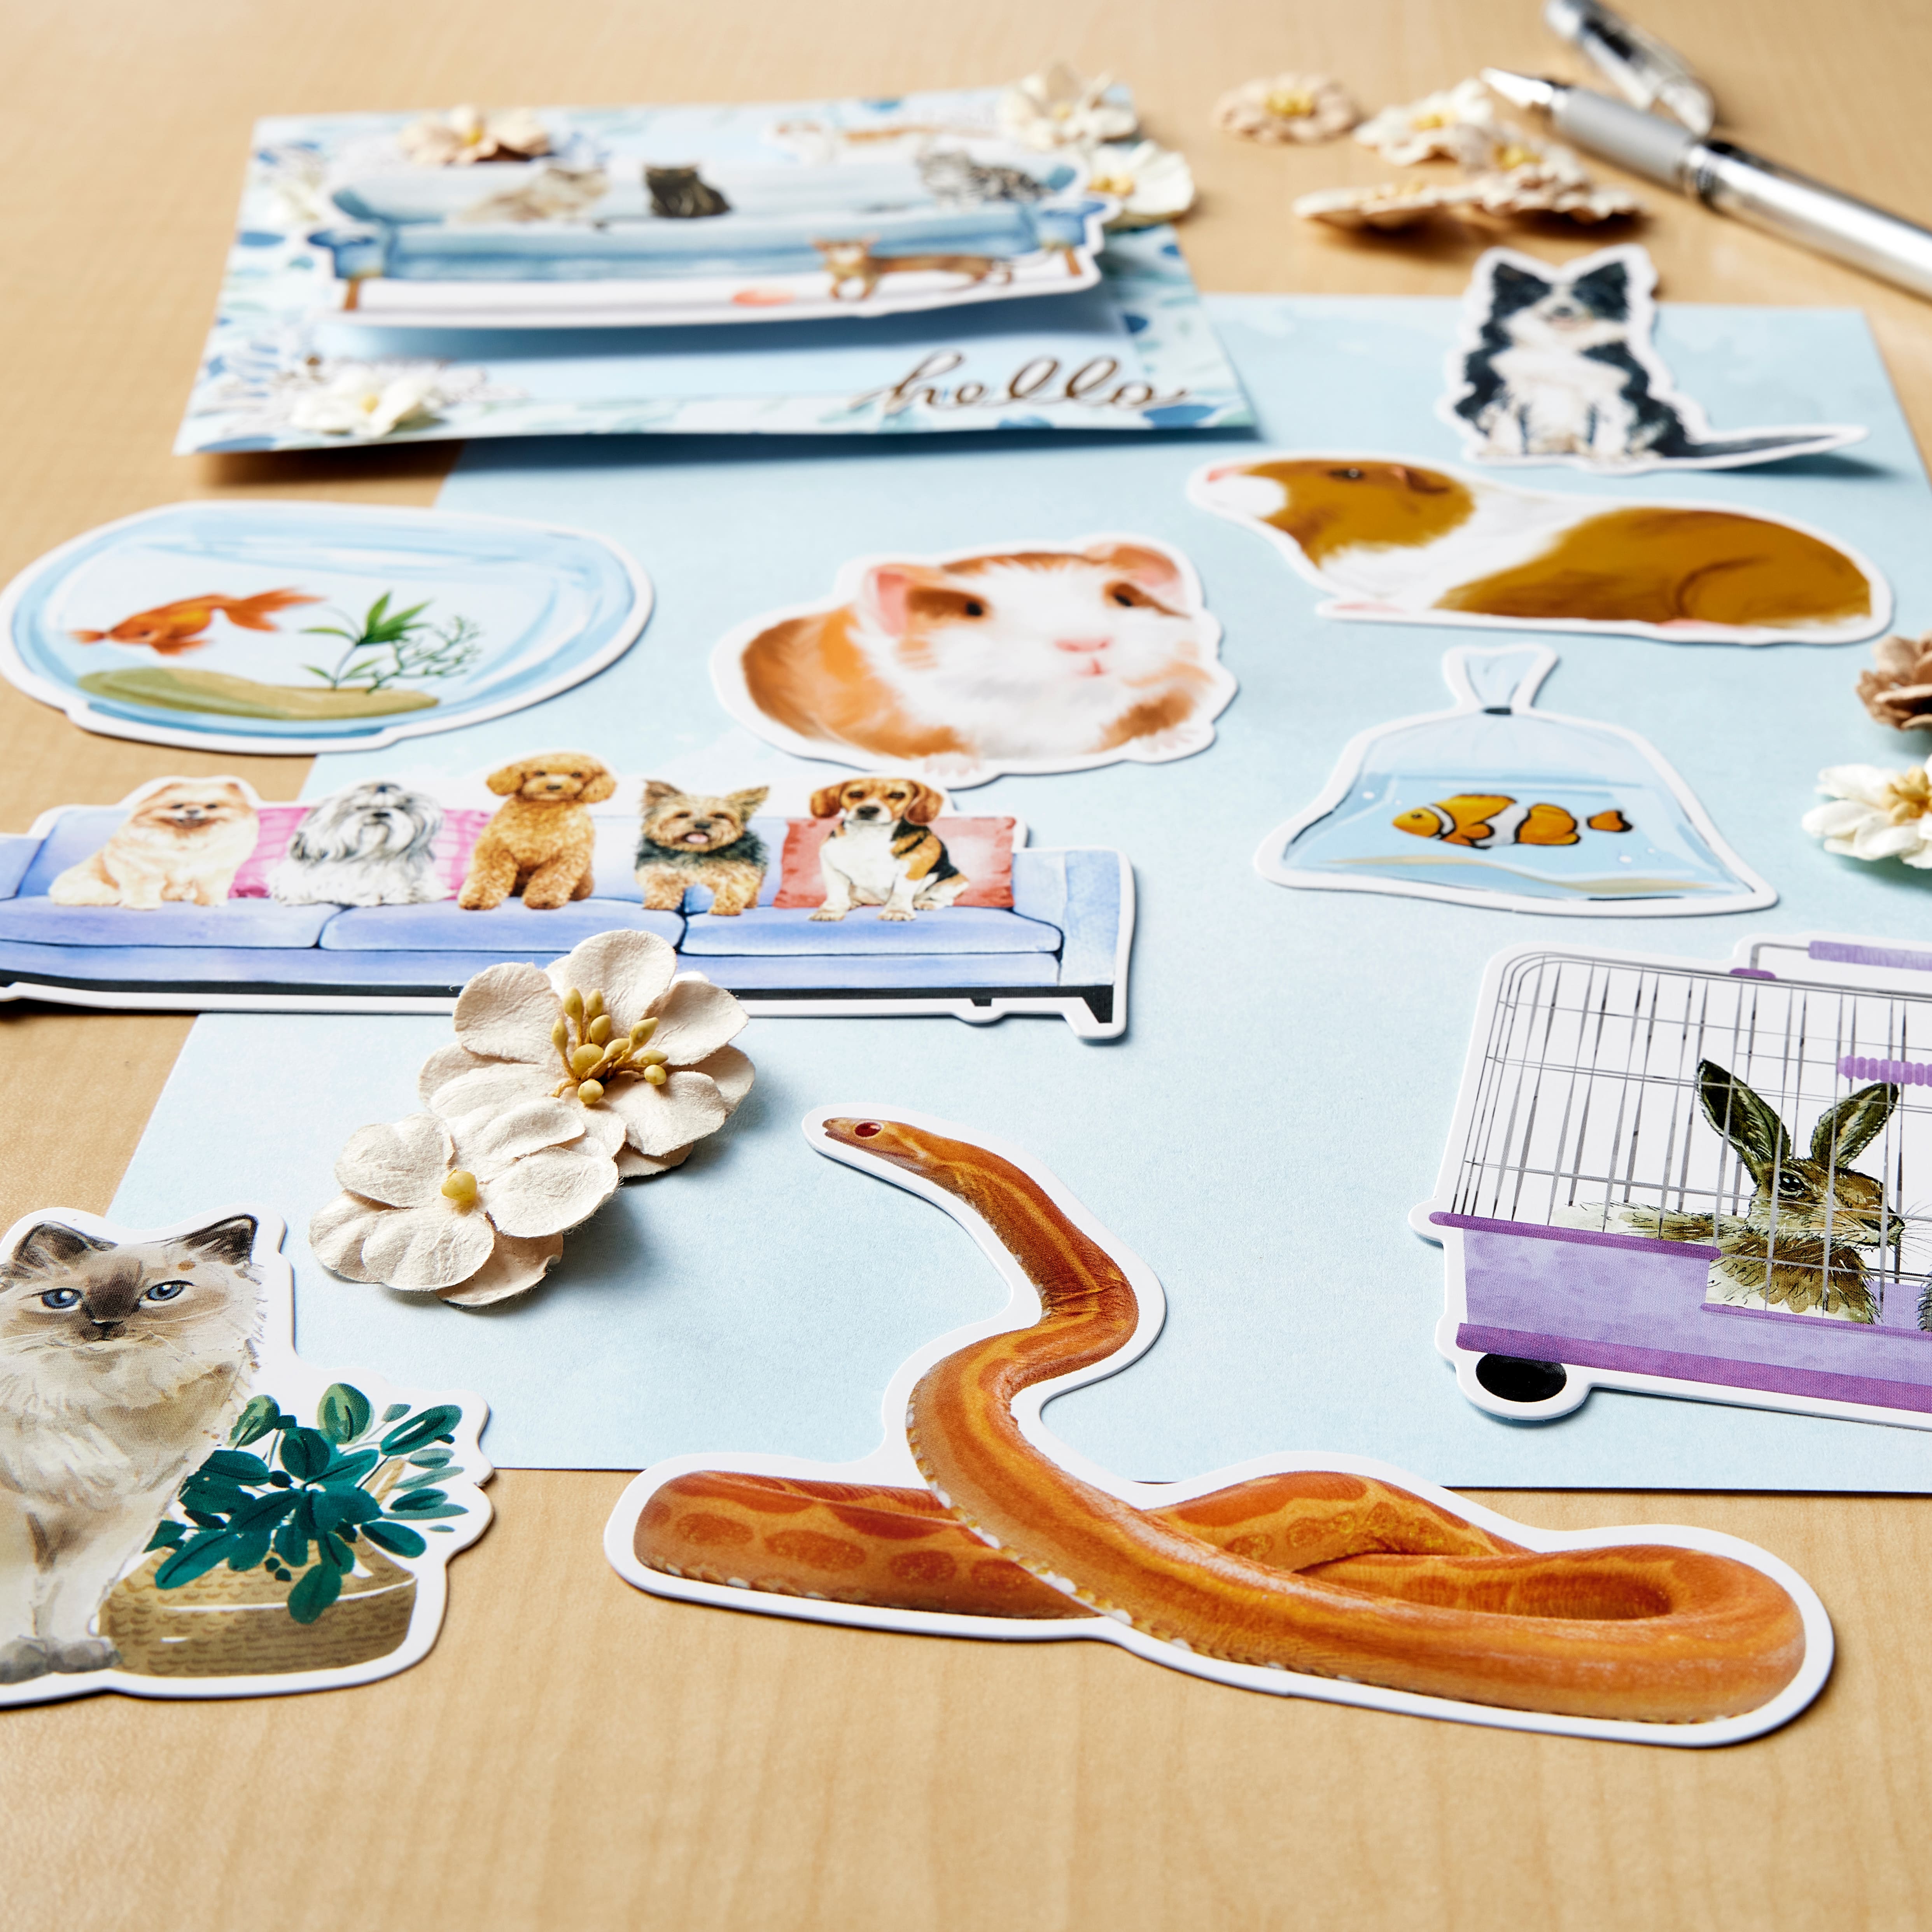 12 Pack: Pets Die Cut Stickers by Recollections&#x2122;